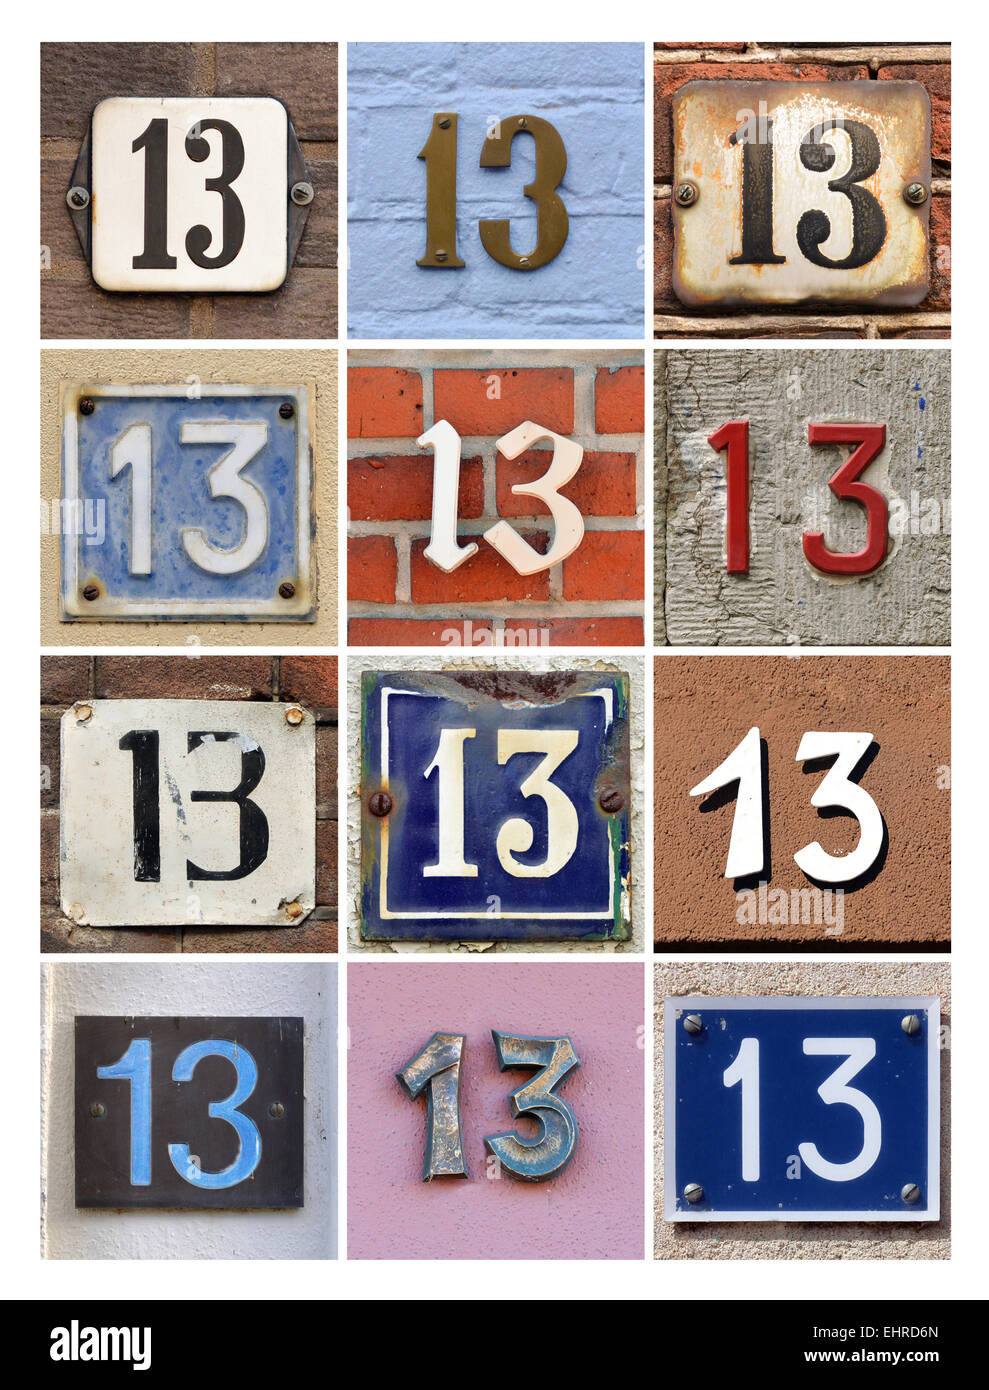 Number 13 - Collage of House Numbers Thirteen Stock Photo